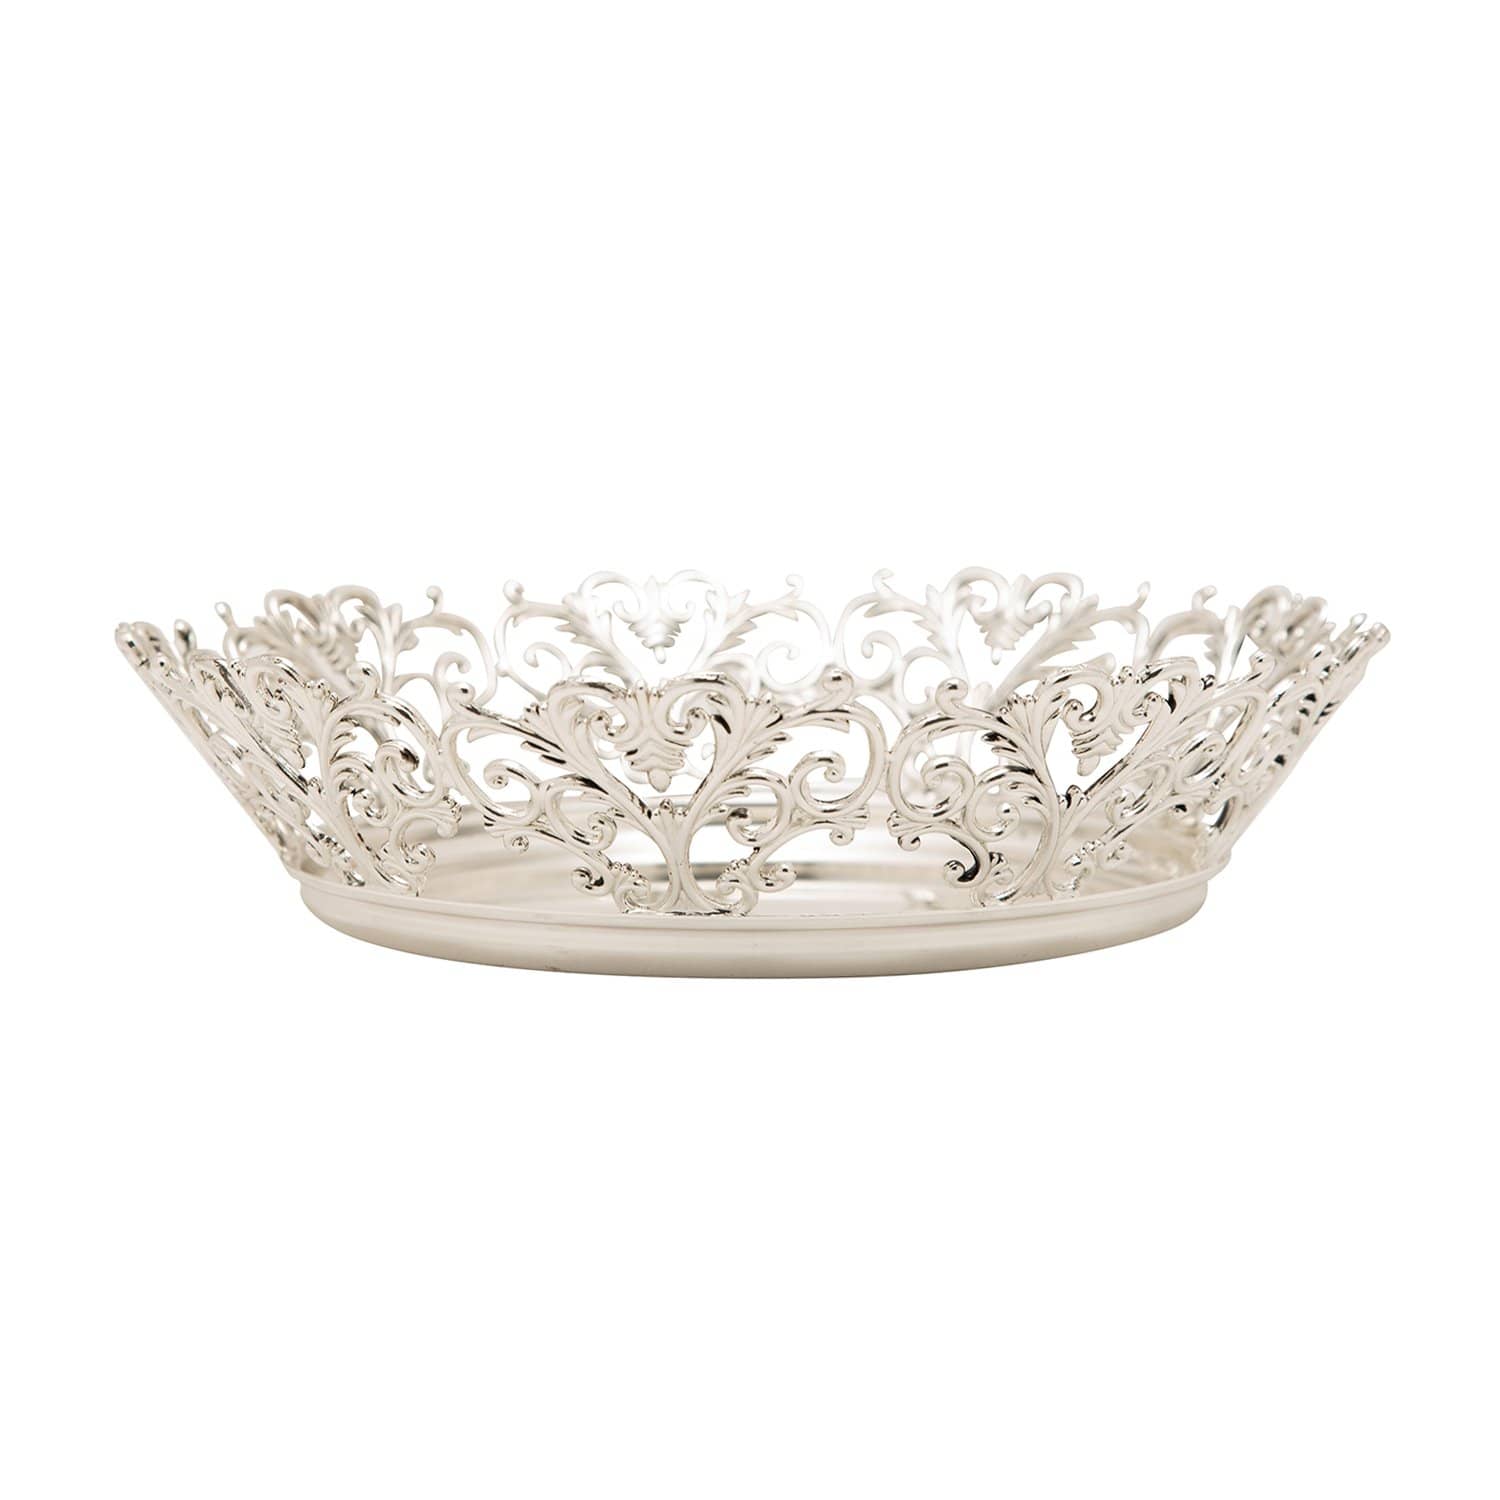 SILVER PLATED ROUND BOWL